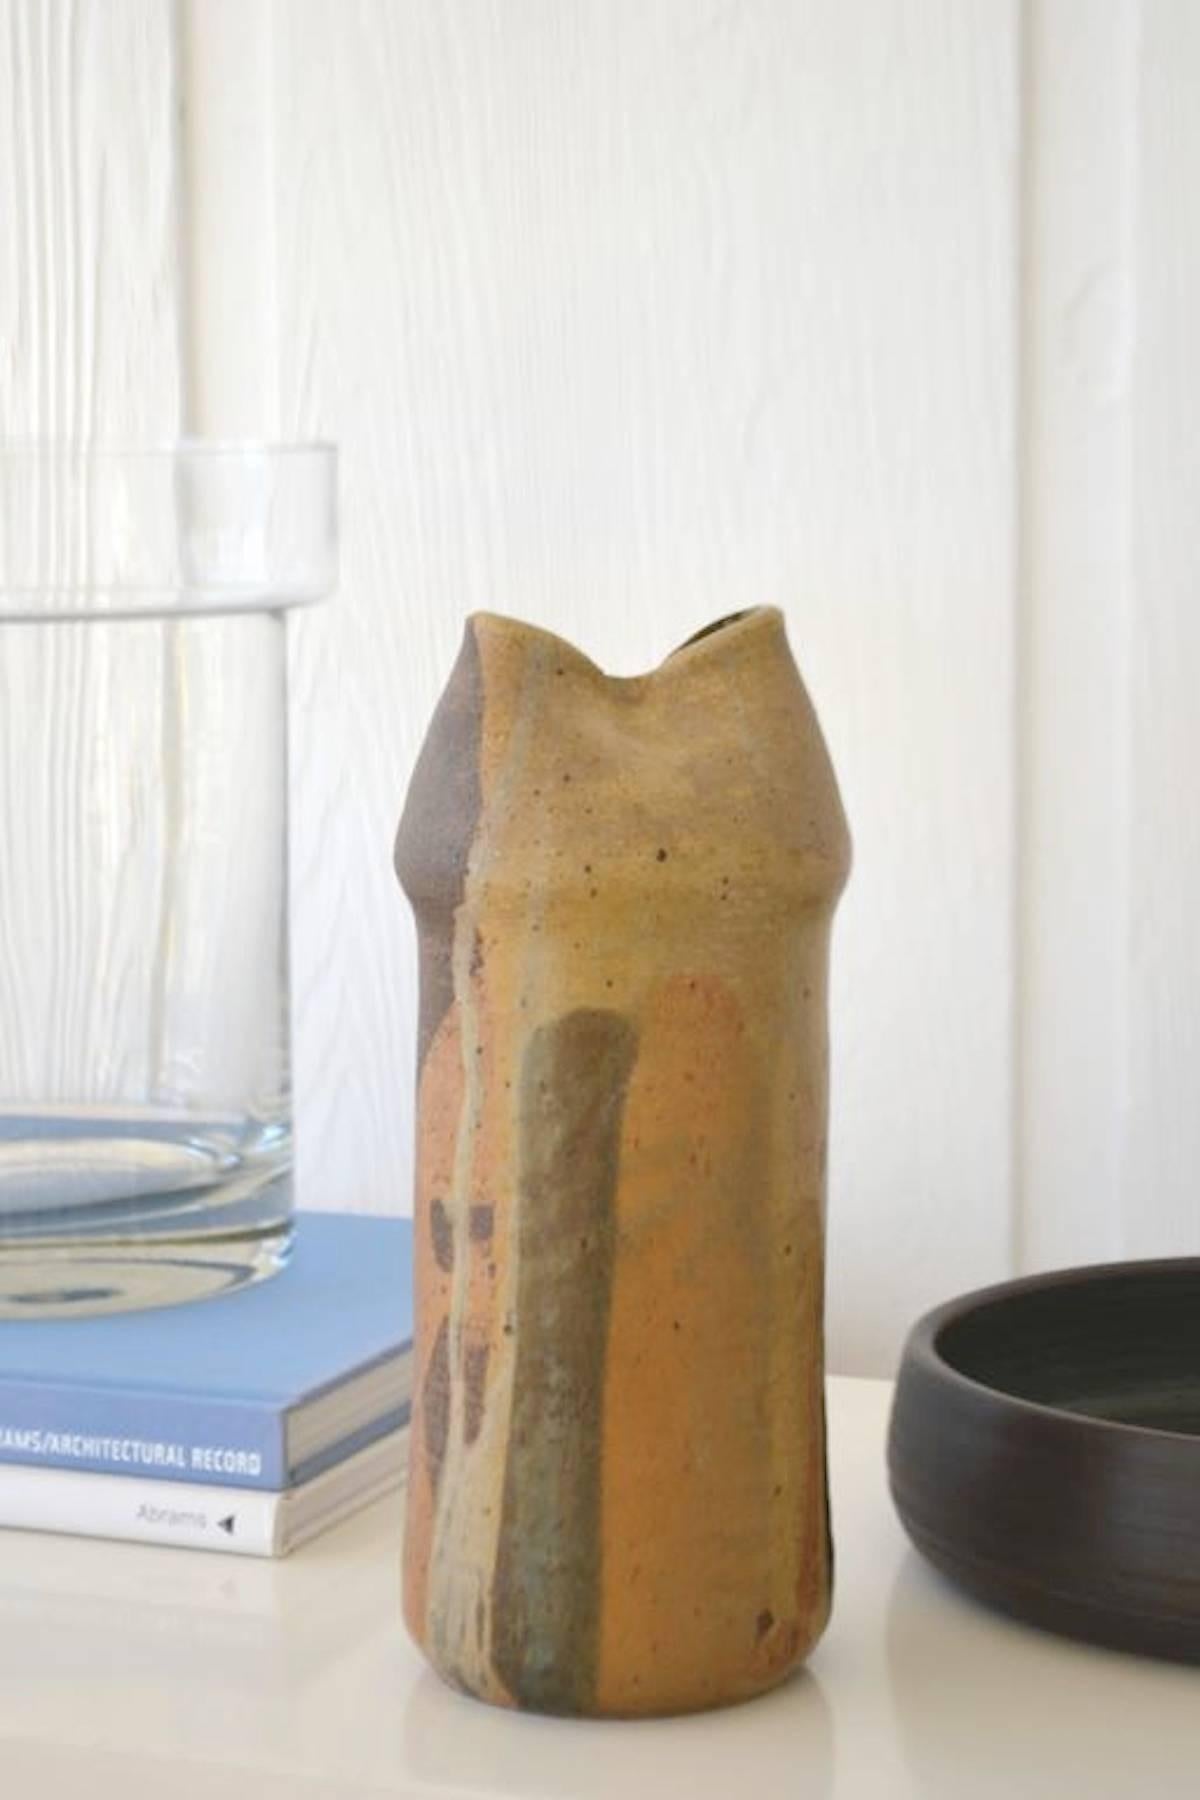 Sculptural midcentury hand thrown ceramic organic form vase, circa 1975. This striking artisan vessel is drip glazed with alternating colors/shapes and designed with tactile impressions and a pinched opening.